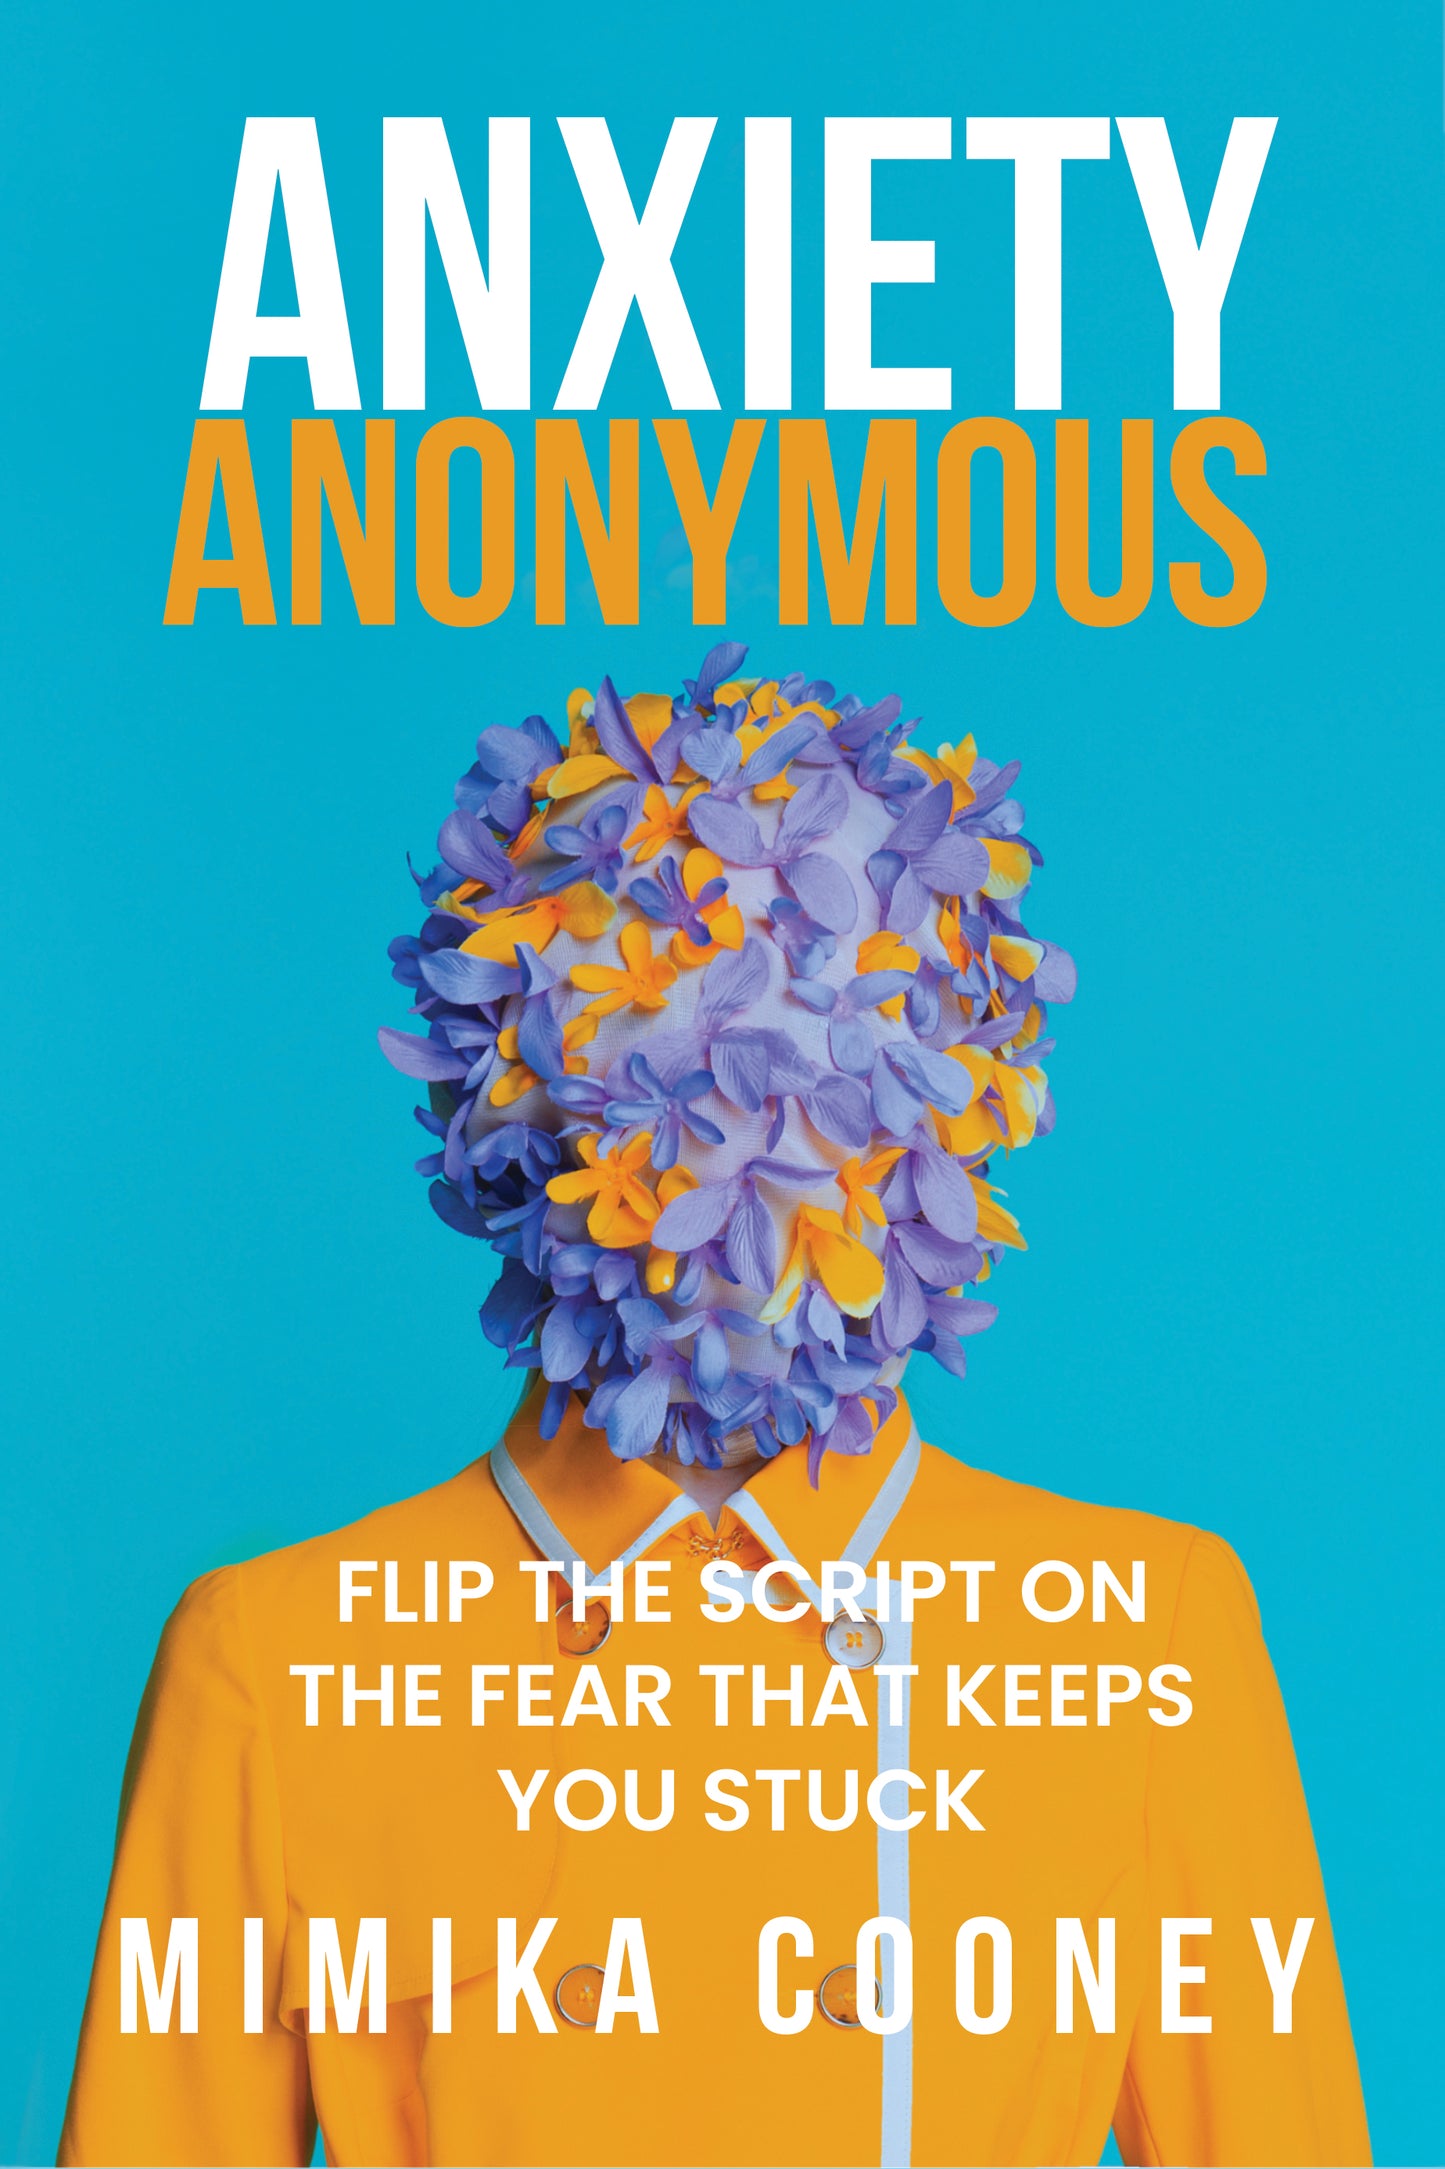 Anxiety Anonymous: Flipping The Script On The Fear That Keeps You Stuck (PAPERBACK)